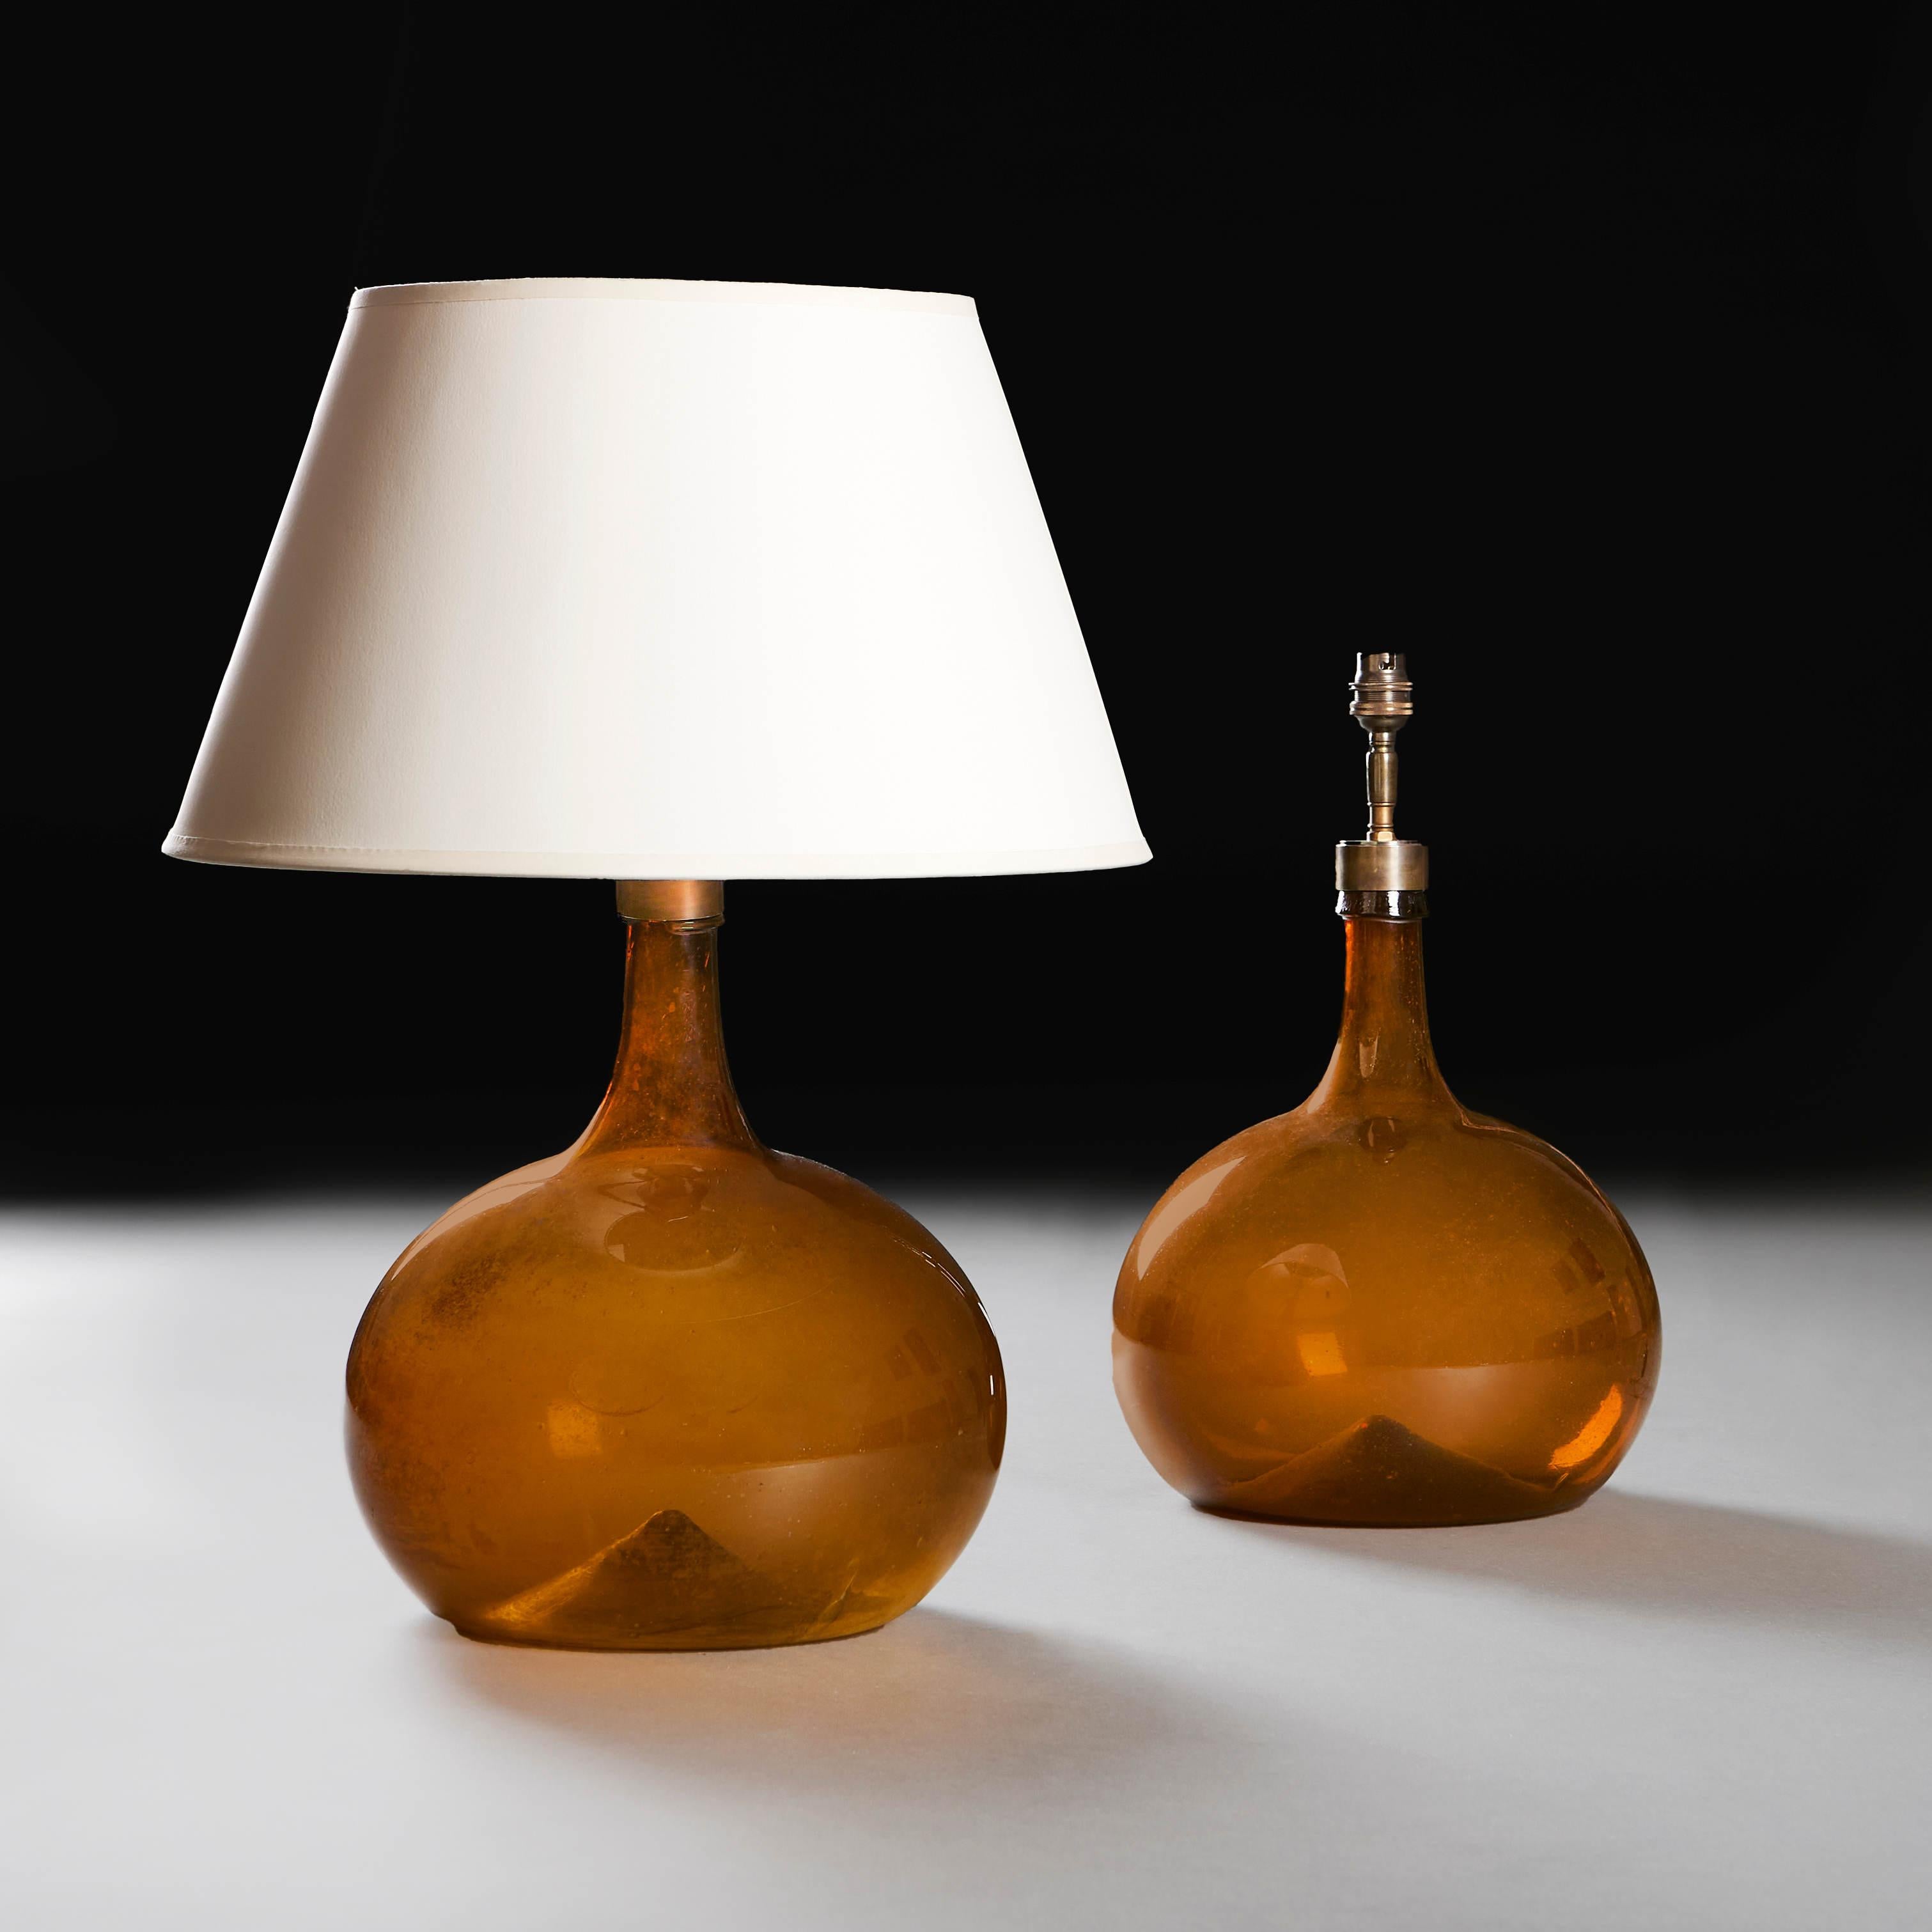 A pair of amber glass wine vessels of rotund form with bottle necks, now converted as lamps
France, circa 1900
Height of vase 33.00cm
Height with shade 58.00cm
Diameter of base 25.00cm
Please note: Does not include the lampshade. Photographed with